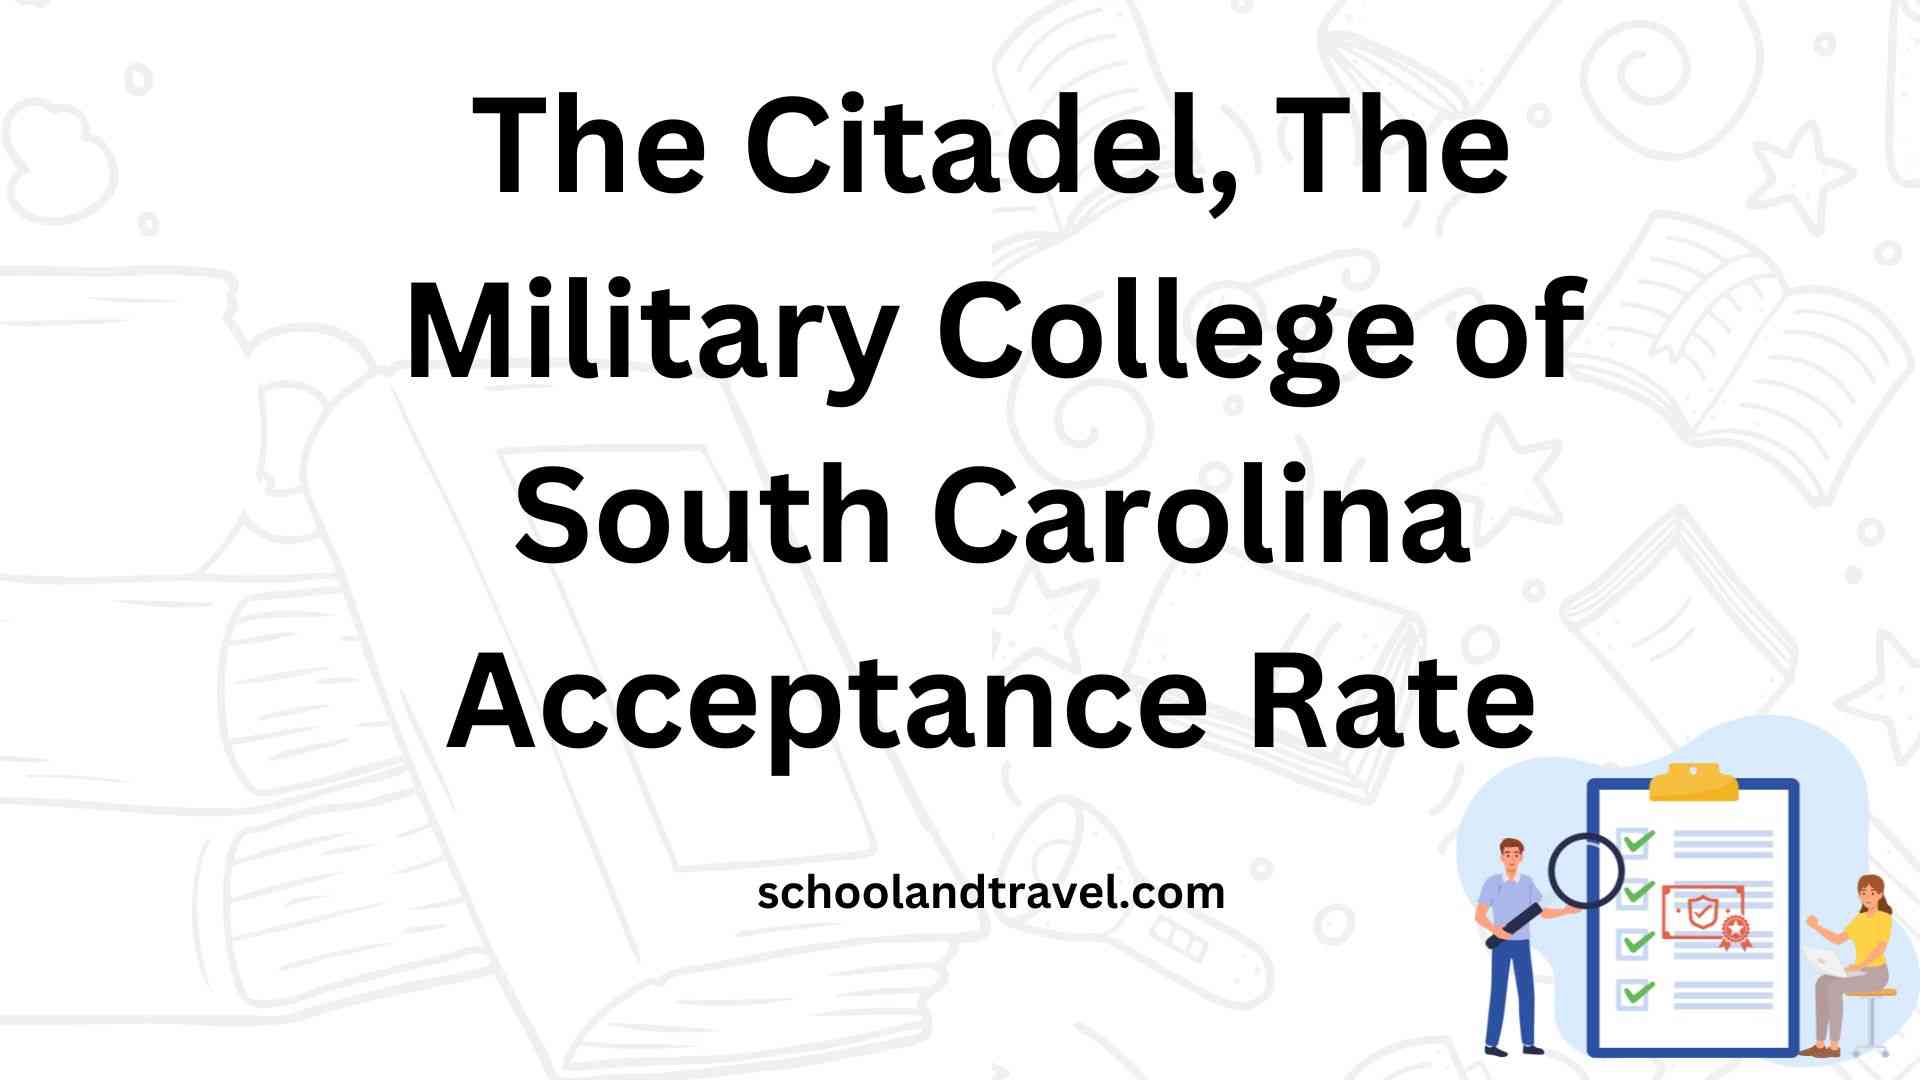 The Citadel, The Military College of South Carolina Acceptance Rate